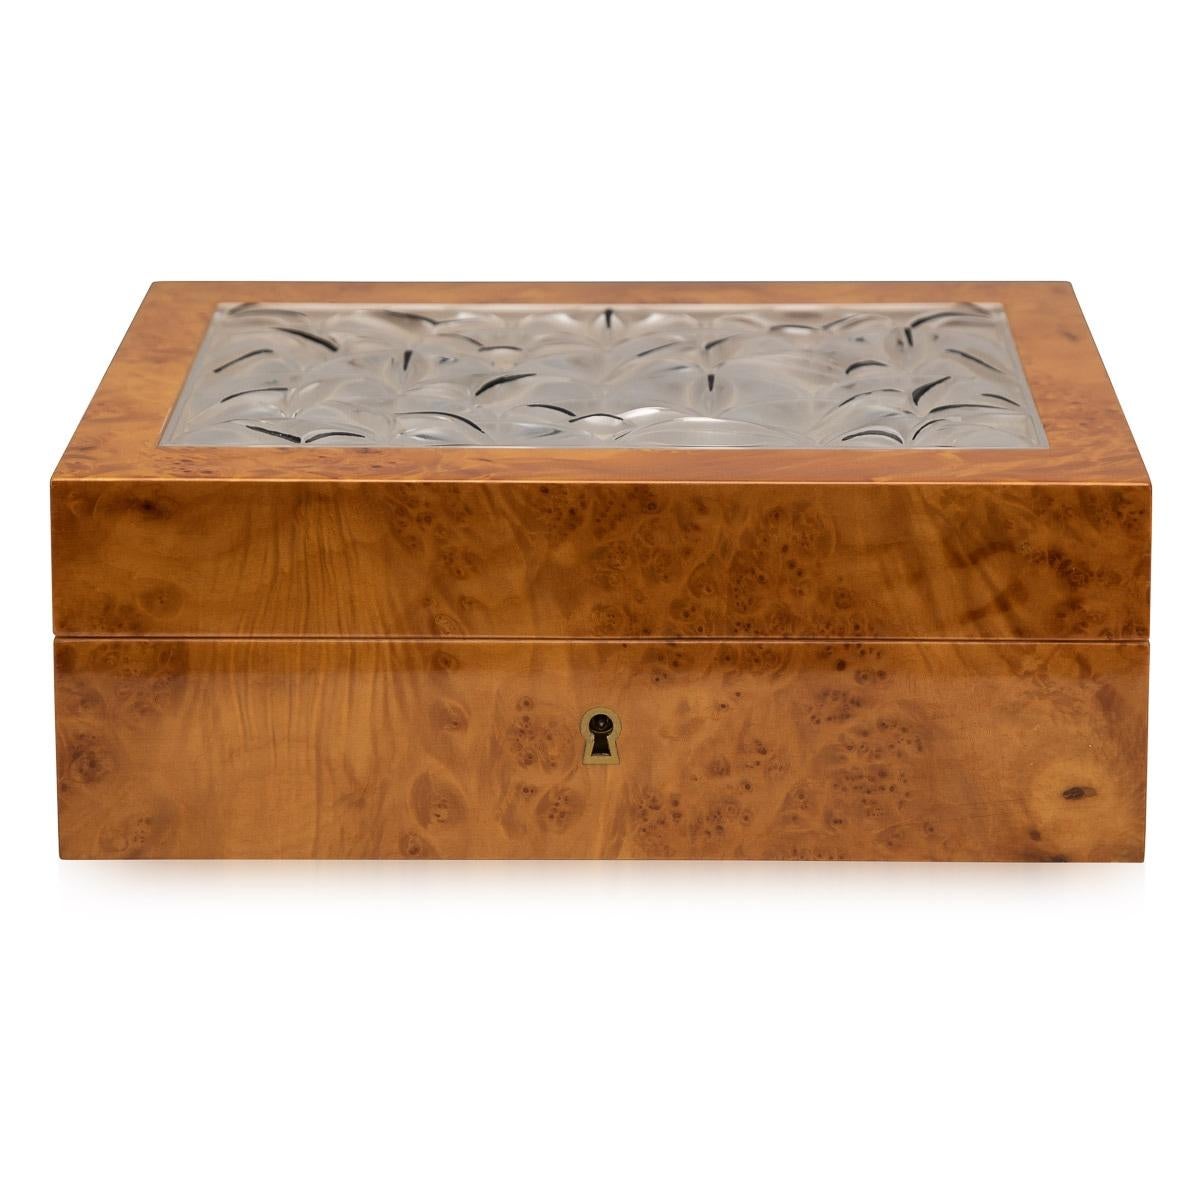 Stylish 20th century French Lalique cigar box / table humidor, made of burr walnut and top mounted with glass, designed and made by Lalique.

CONDITION
In great condition - no damage.

SIZE
Width: 24cm
Height: 9cm
Depth: 21cm.